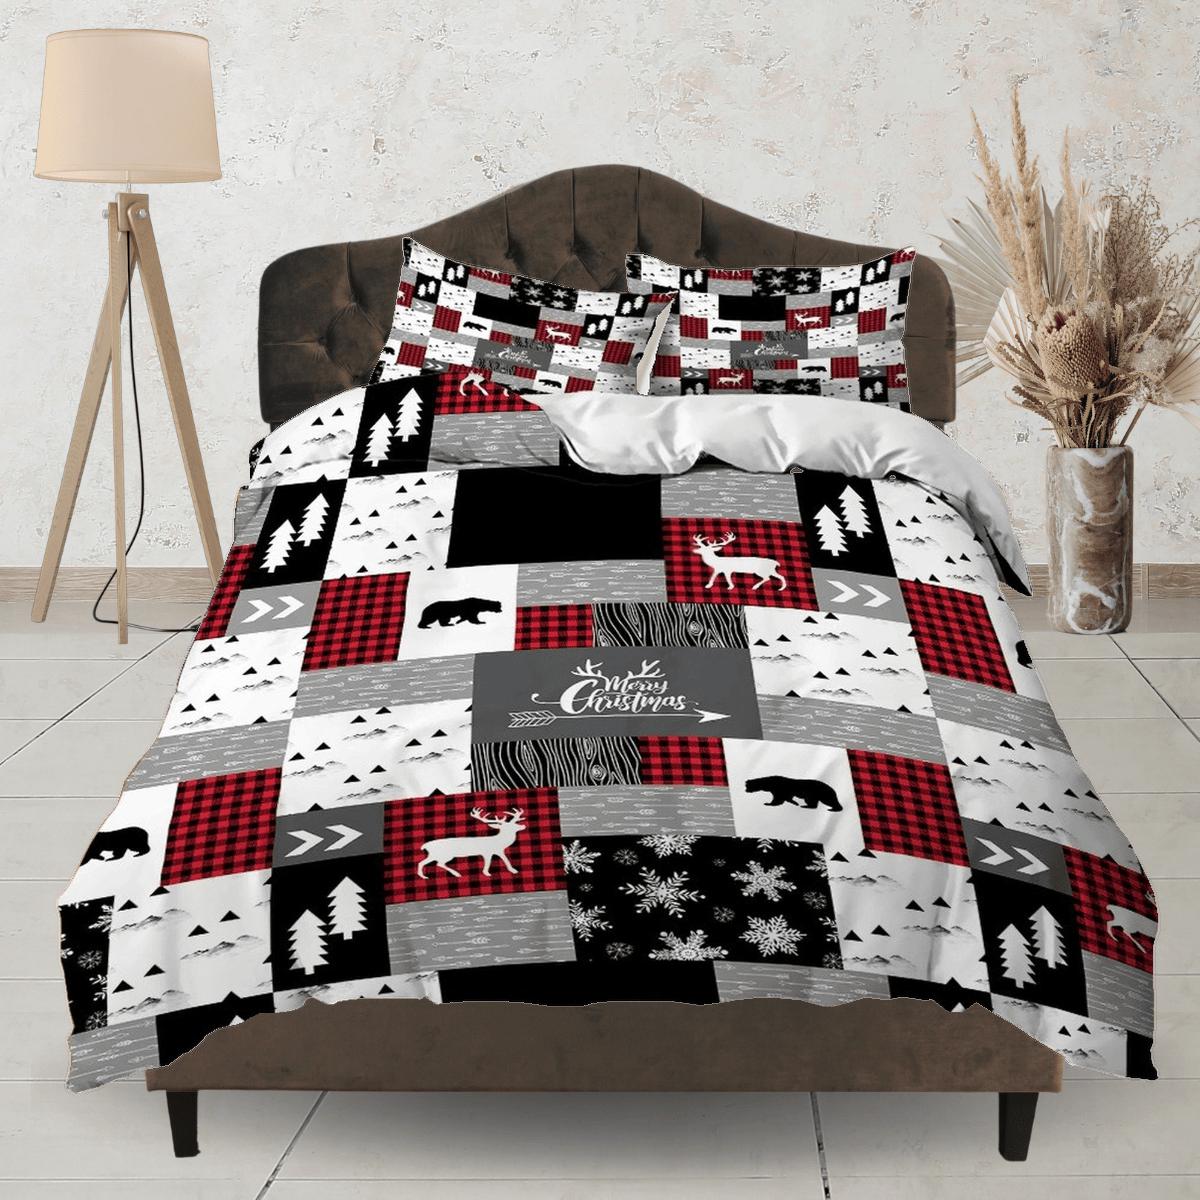 daintyduvet Patchwork Christmas bedding & pillowcase holiday gift duvet cover king queen full twin toddler bedding baby Christmas farmhouse decor